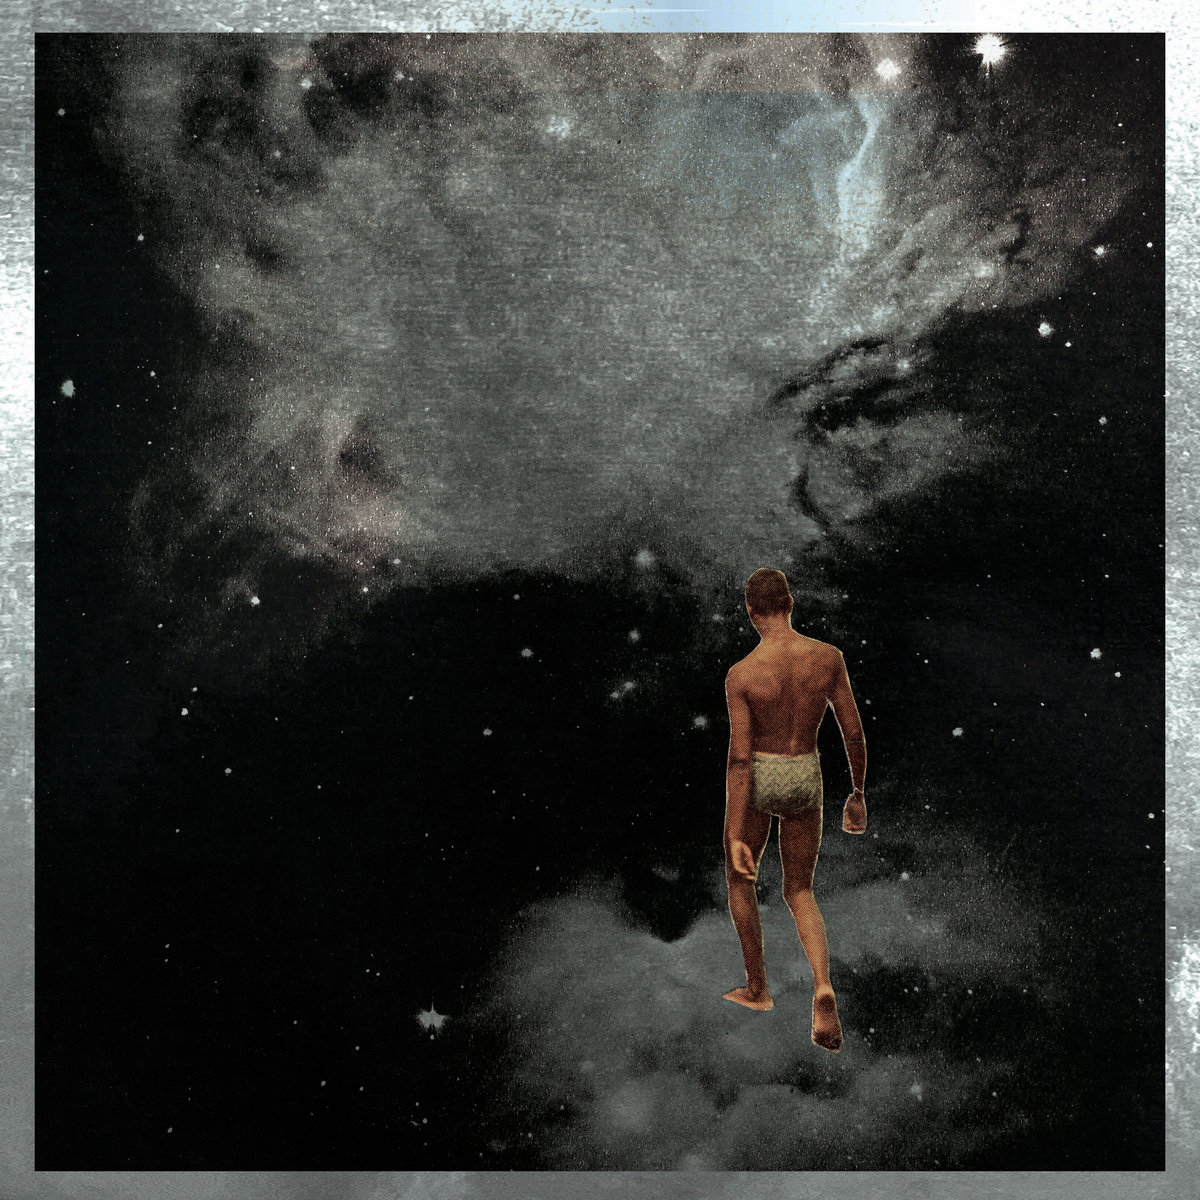 A composite image of a man, seen from behind, walking into the galaxy of stars and nebulae